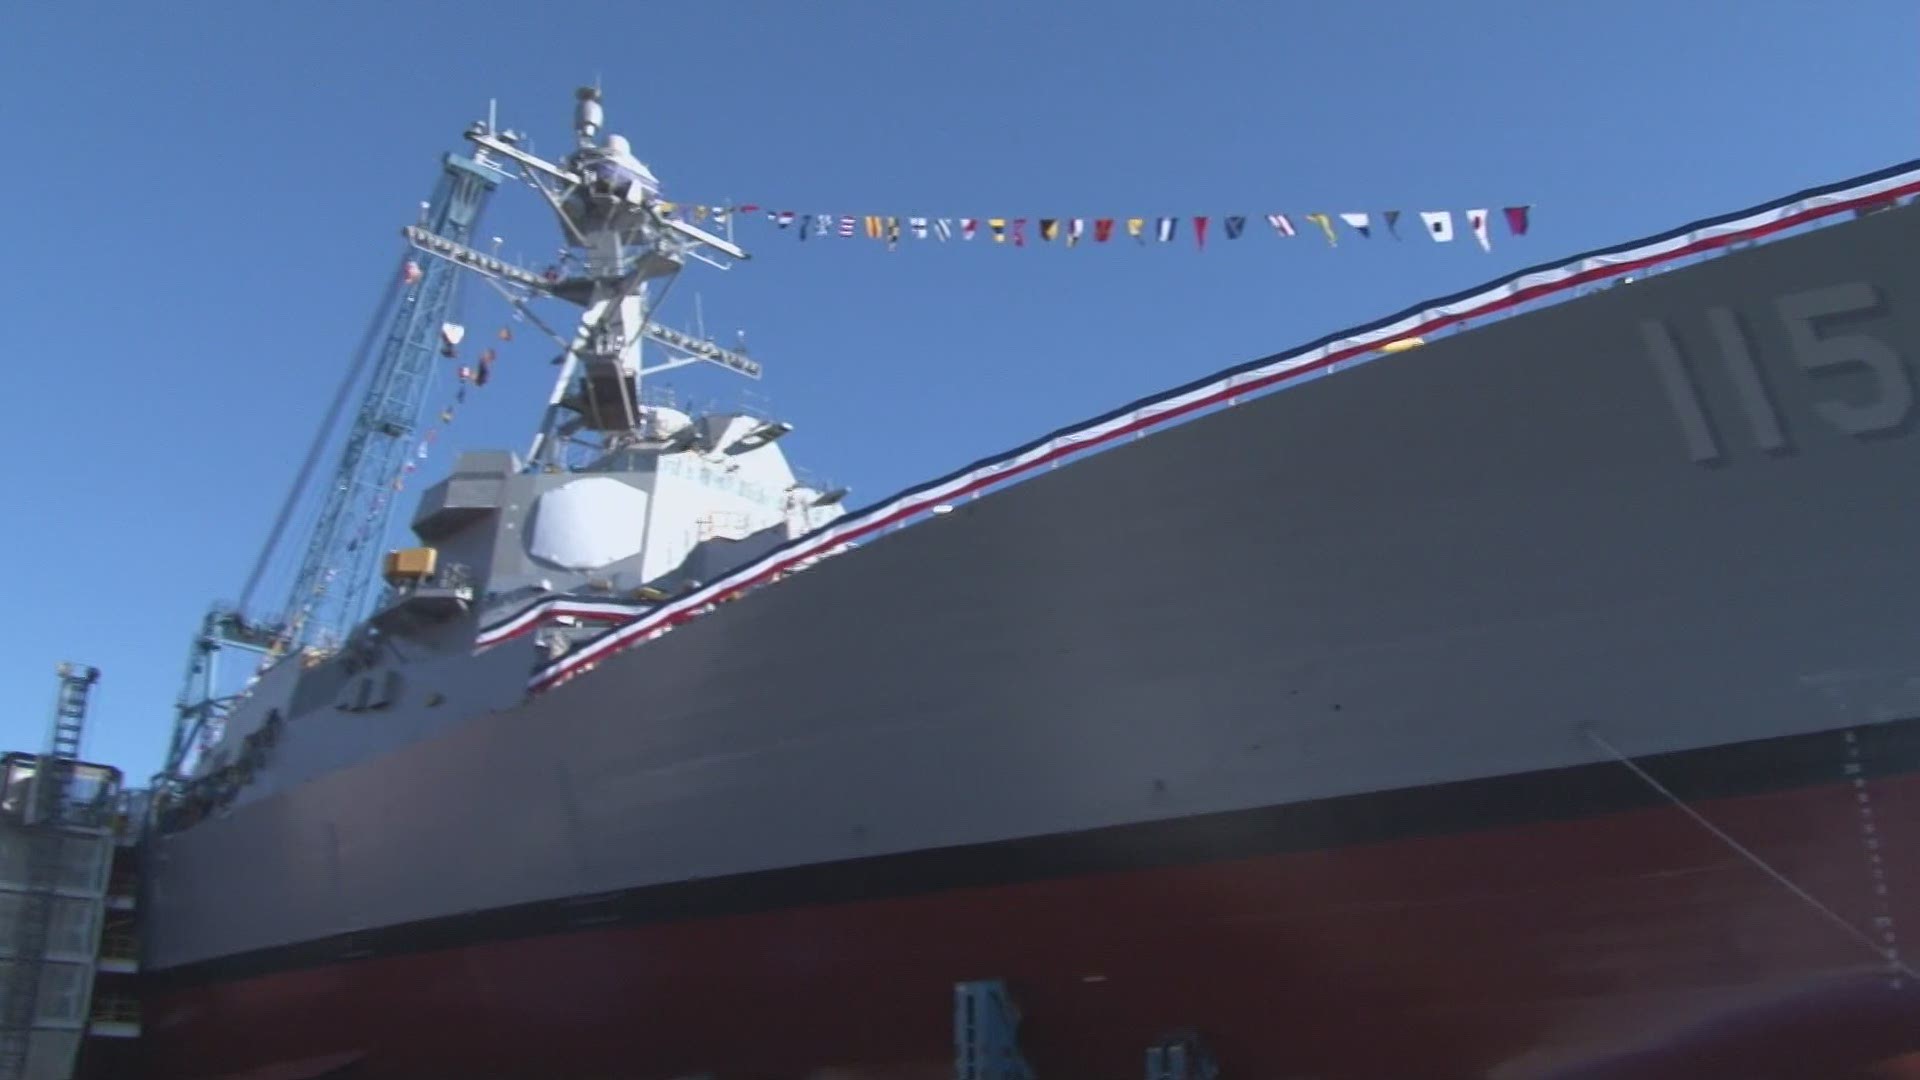 Maine lawmakers in Washington are urging the Biden administration to reconsider a reported proposal that would cut construction of a Navy destroyer made in Maine.